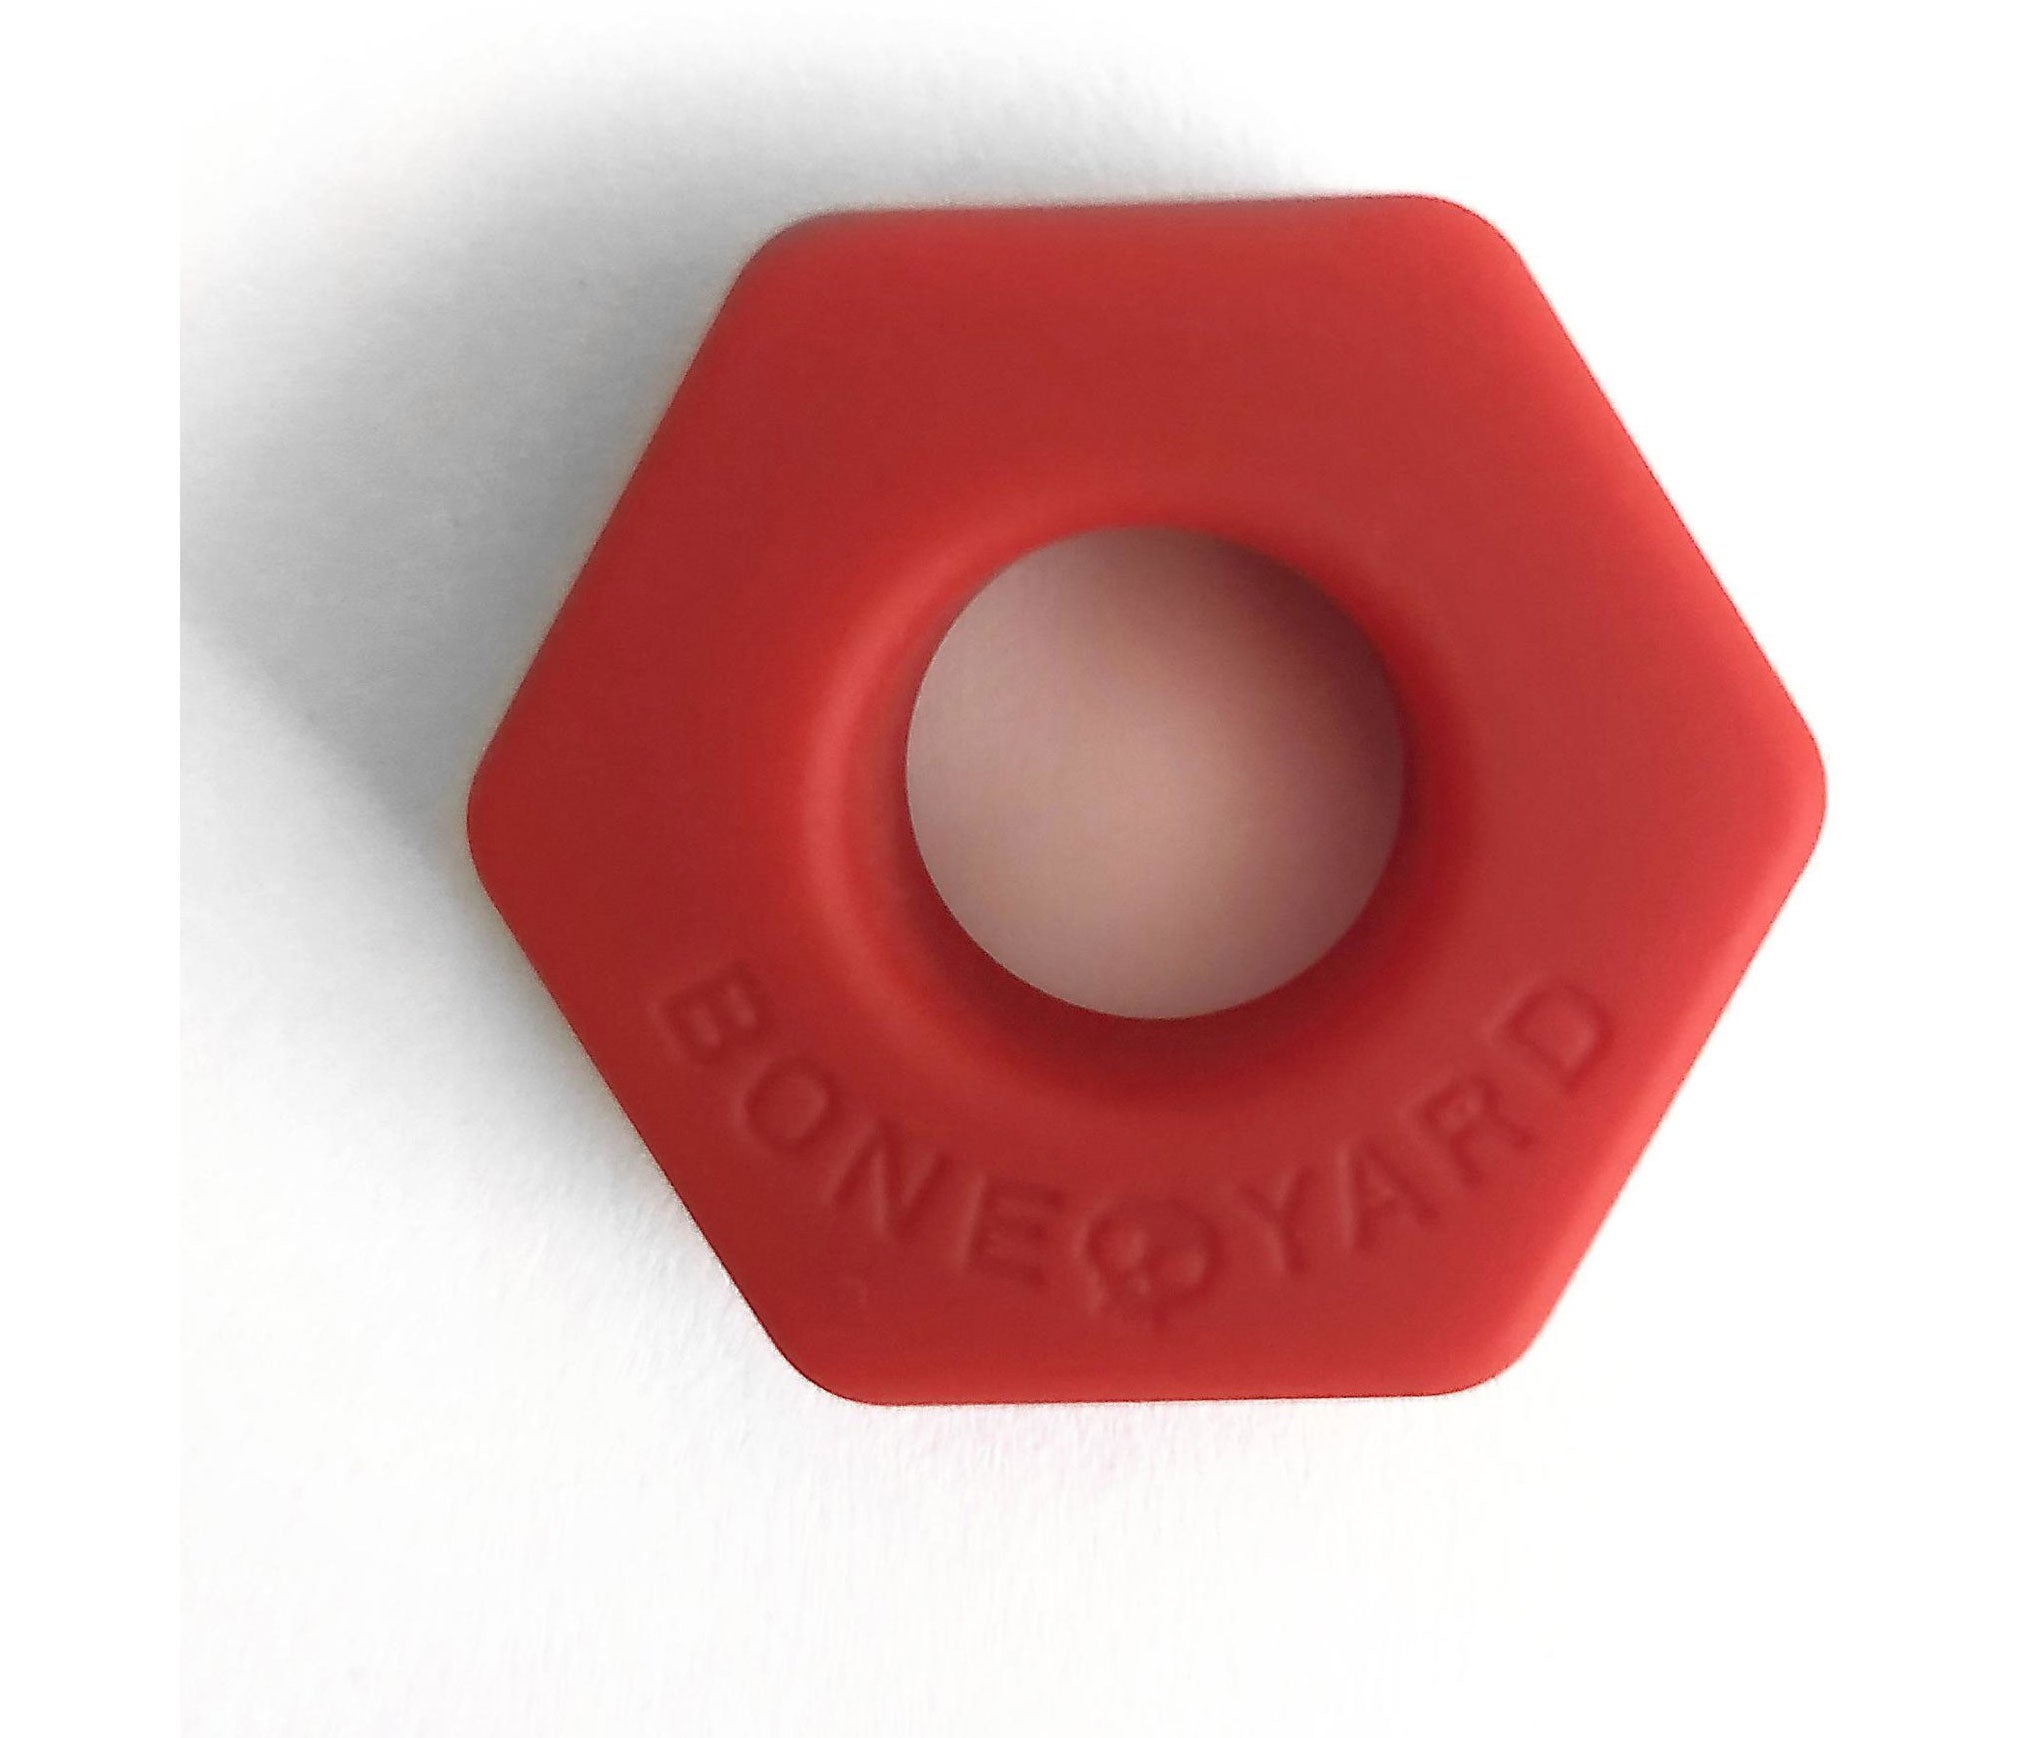 Bust a Nut Cock Ring - Red